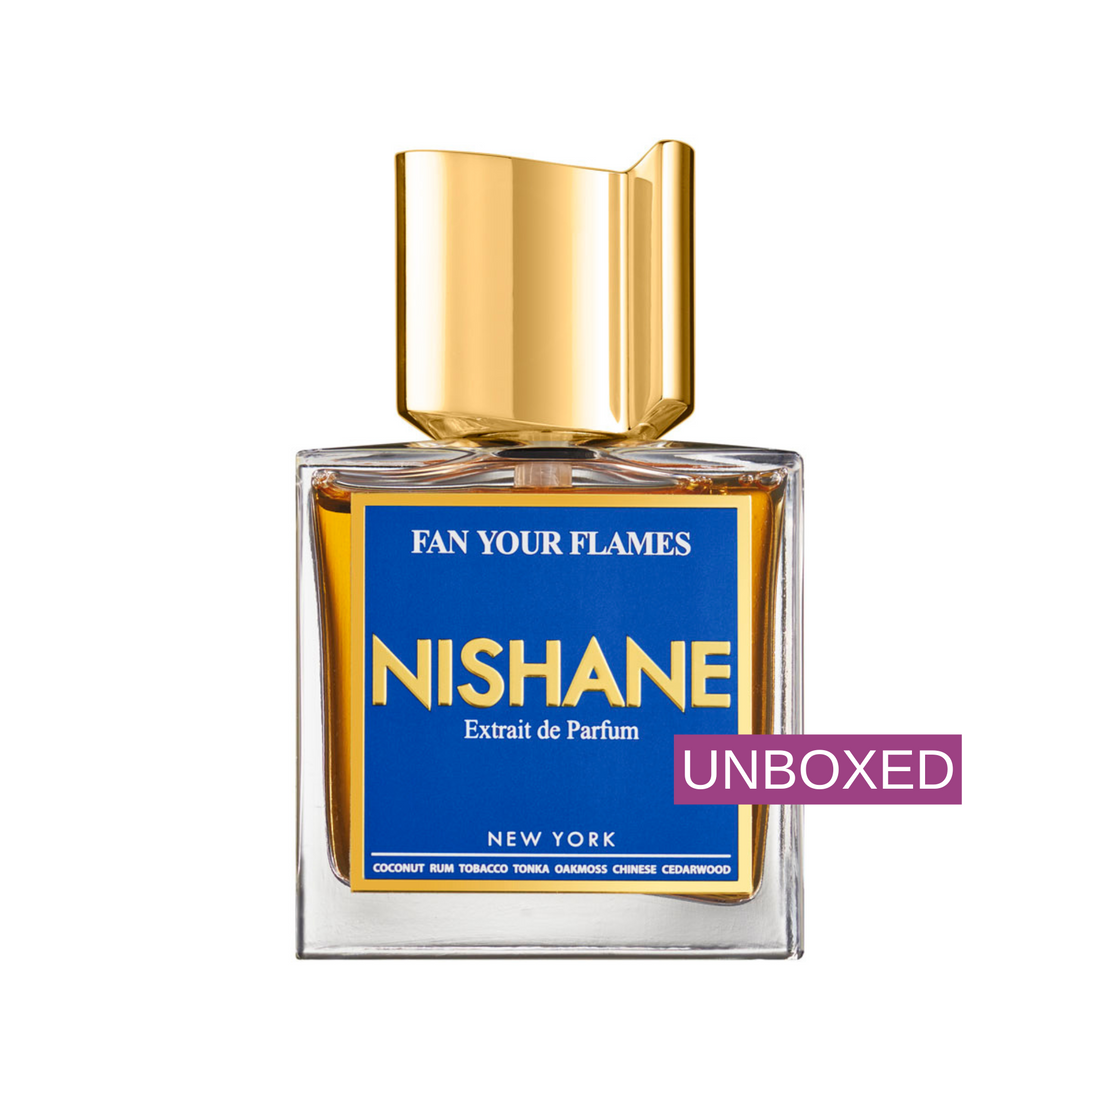 Fan Your Flames Nishane (UNBOXED)